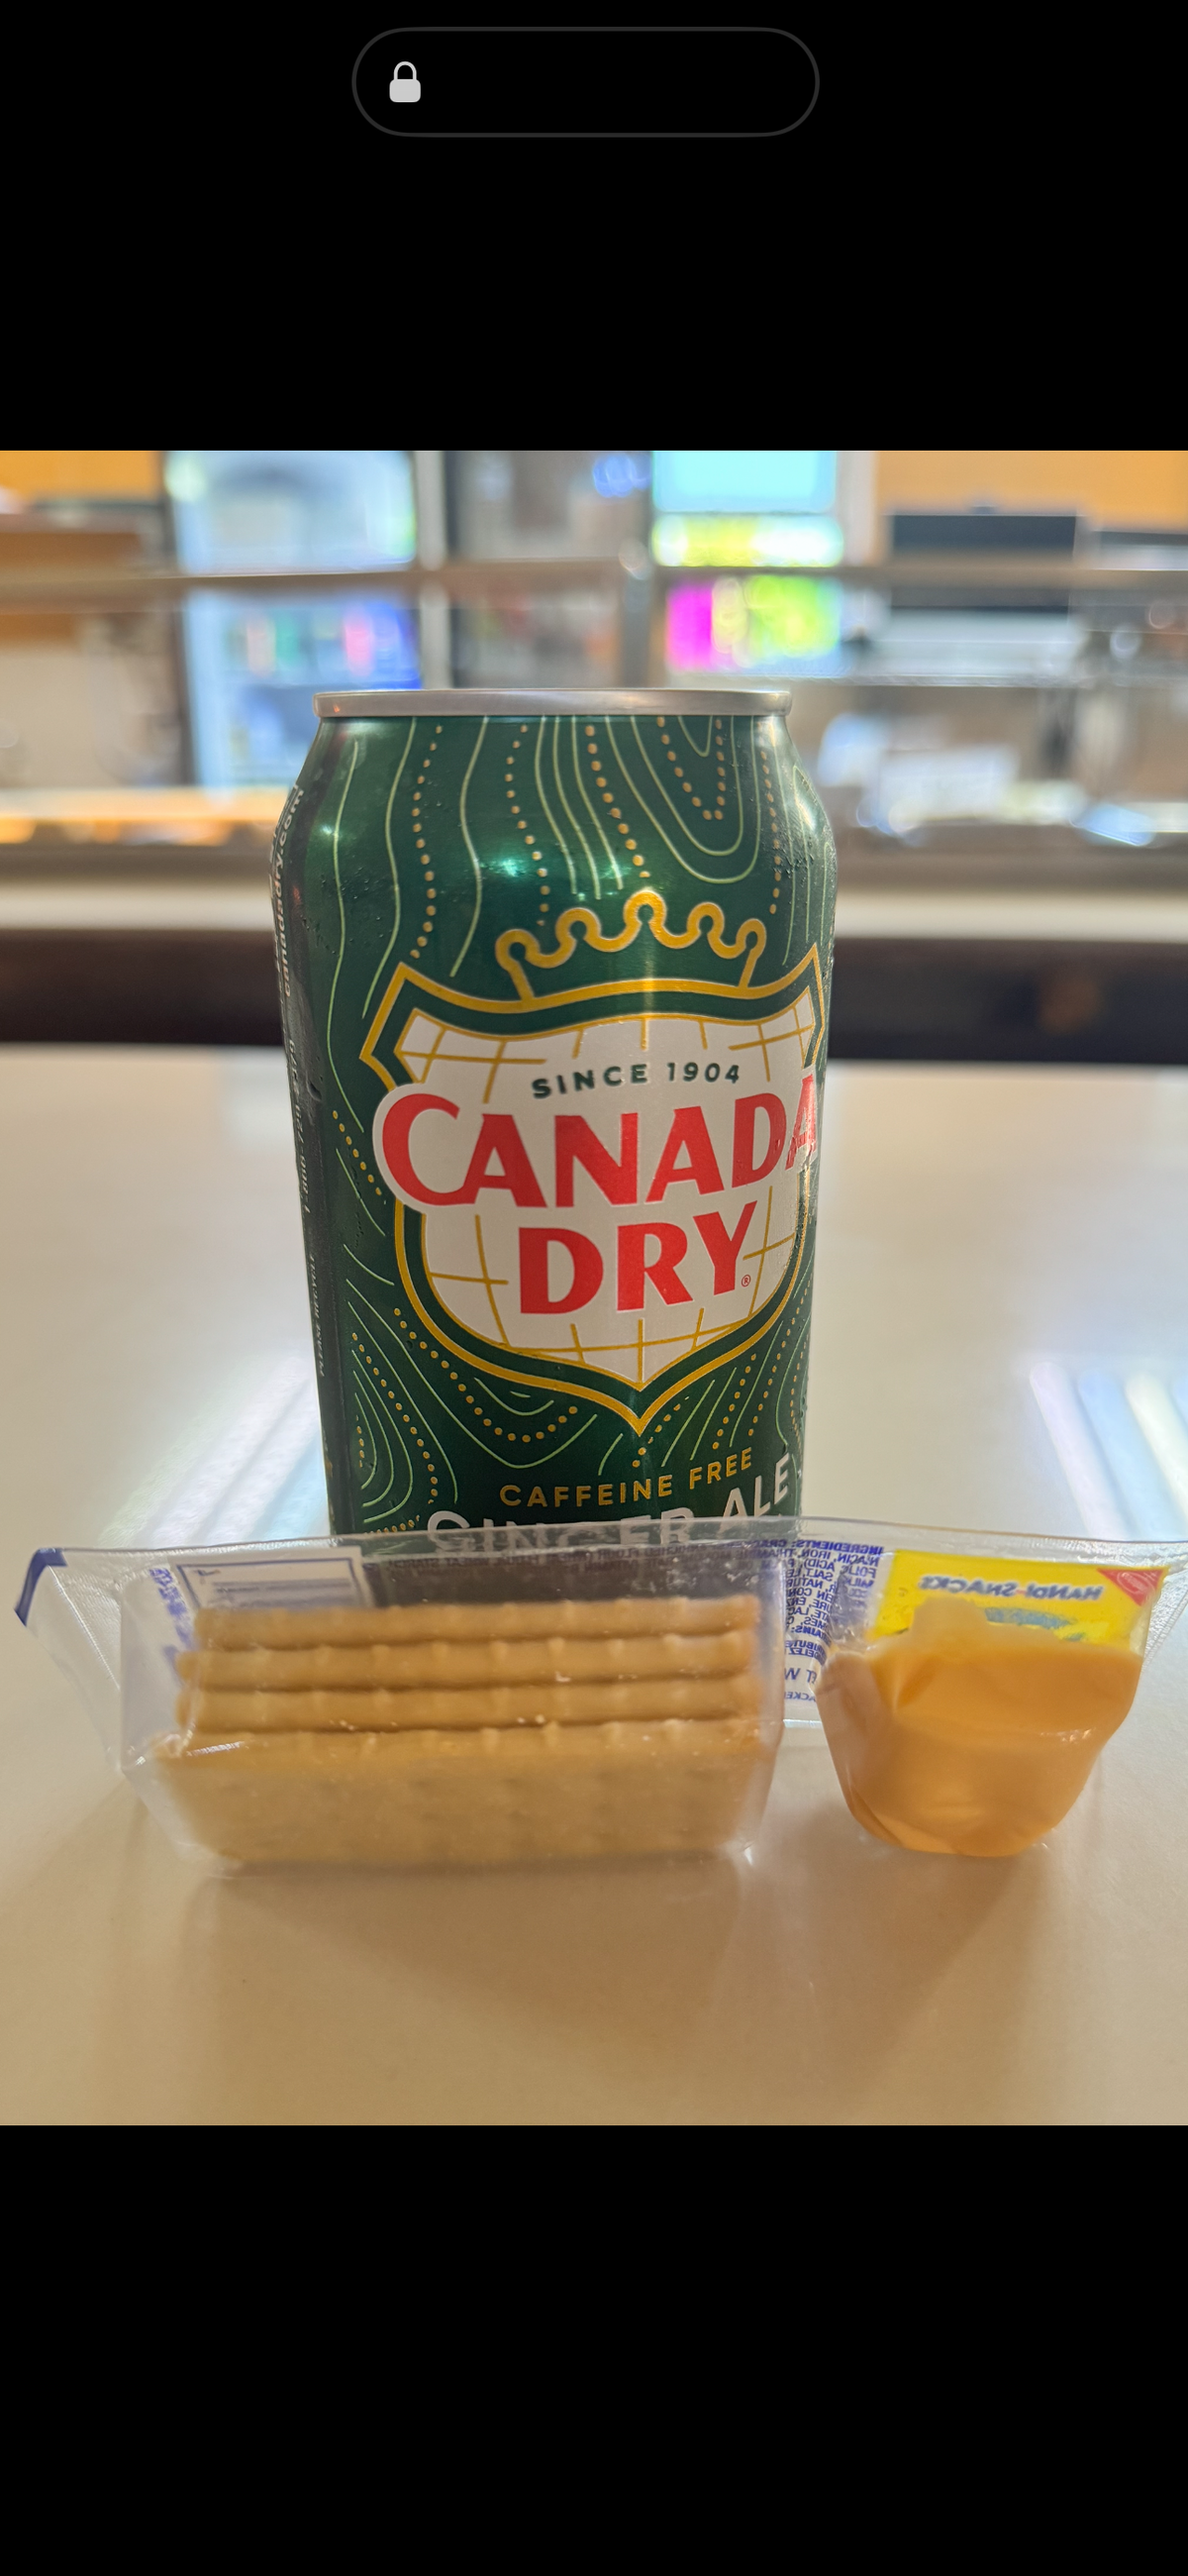 Can Soda and Ritz Crackers and Cheese Bundle for Just $200.00